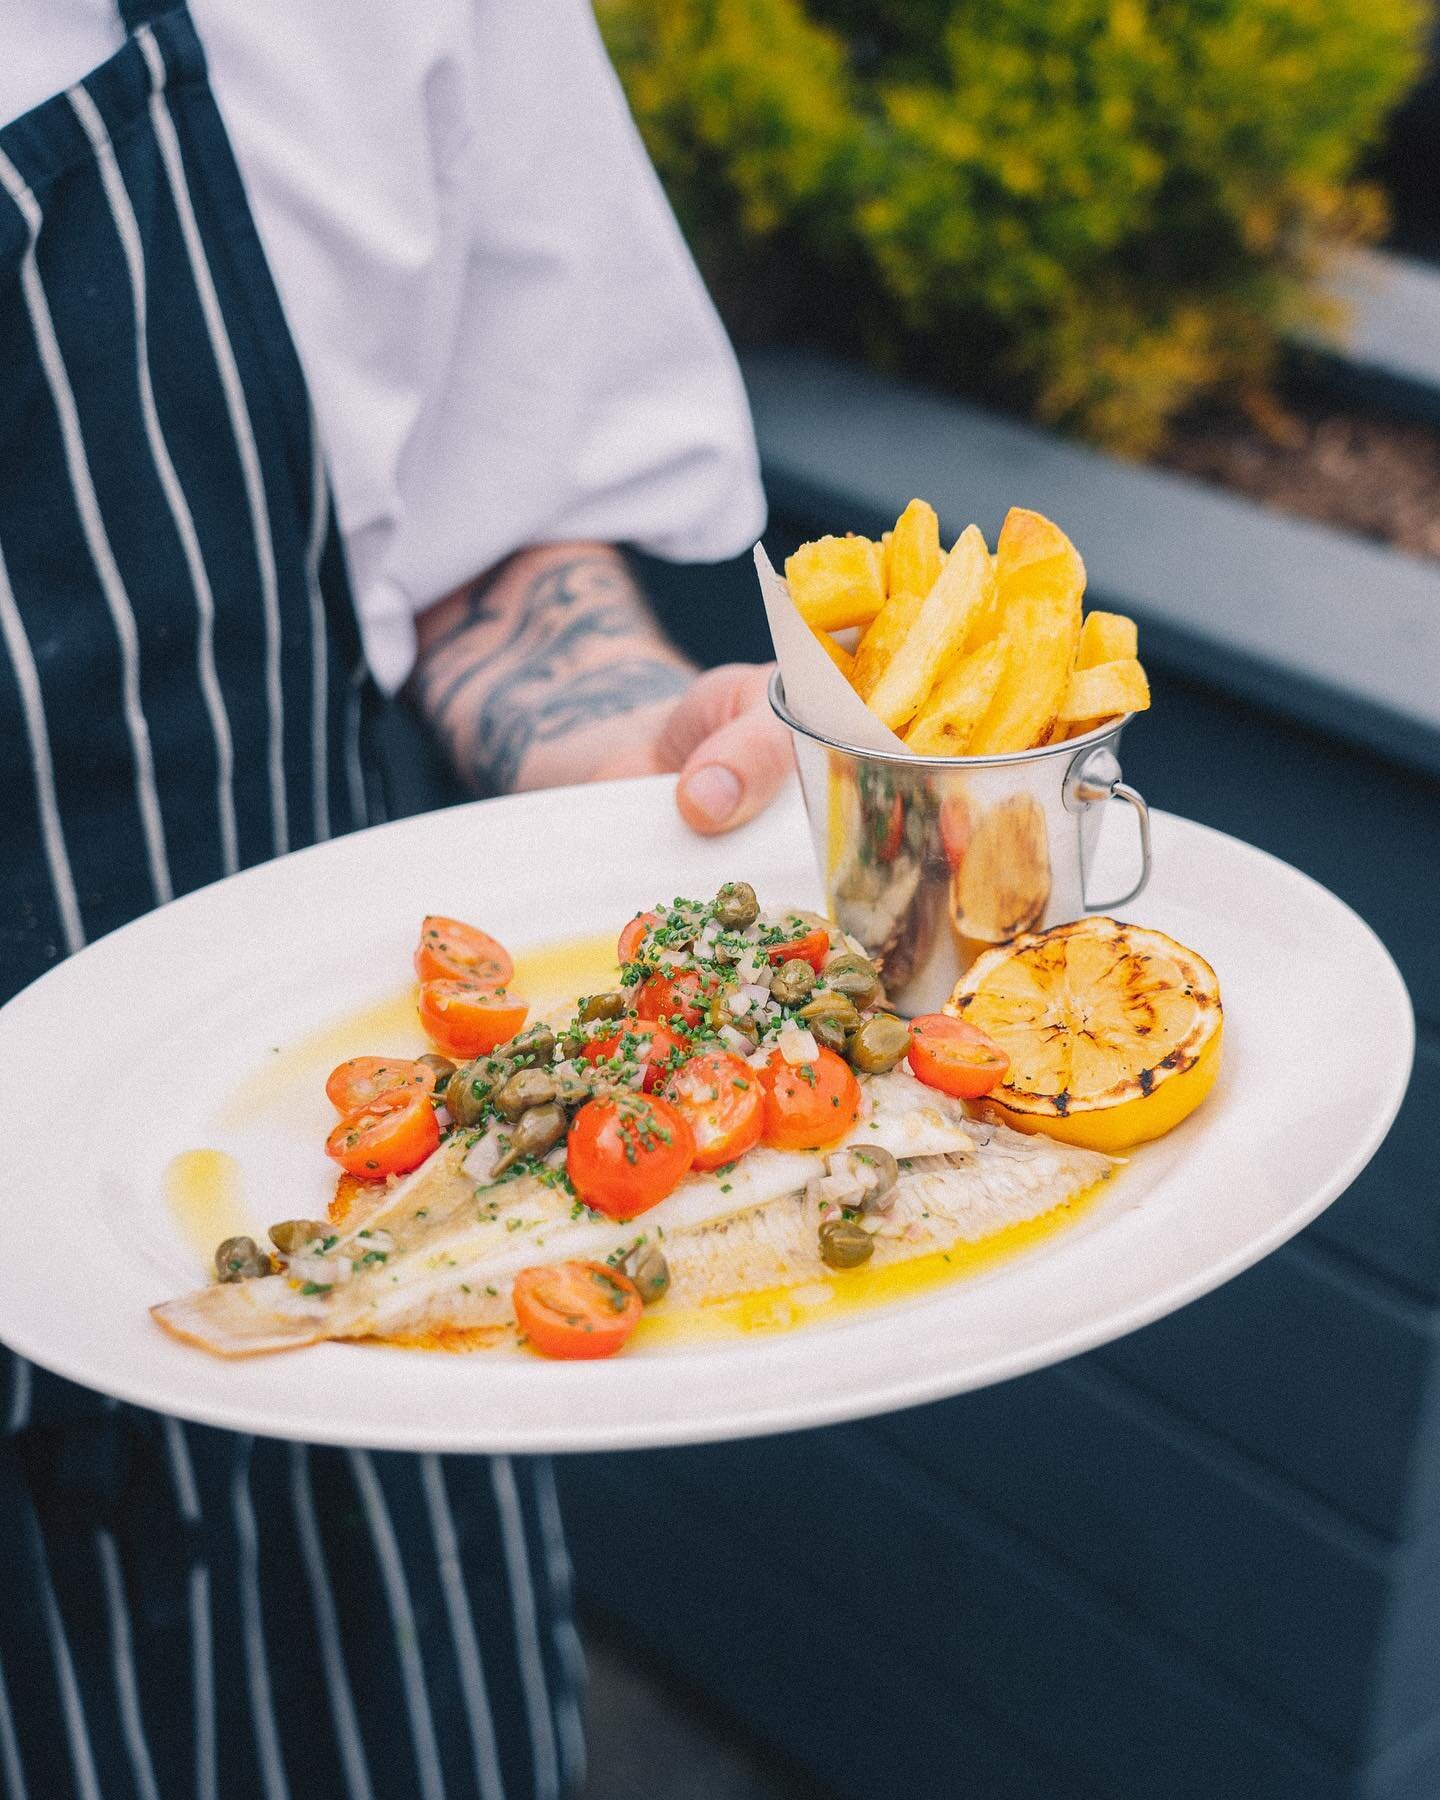 New menu 🎣 Introducing one of our new seafood dishes 👉 Whole Plaice with hand cut chips, shallots, capers &amp; cherry tomatoes. The perfect al fresco summer dish ☀️ 

Link in bio to book a table indoors or on our terrace 🙏